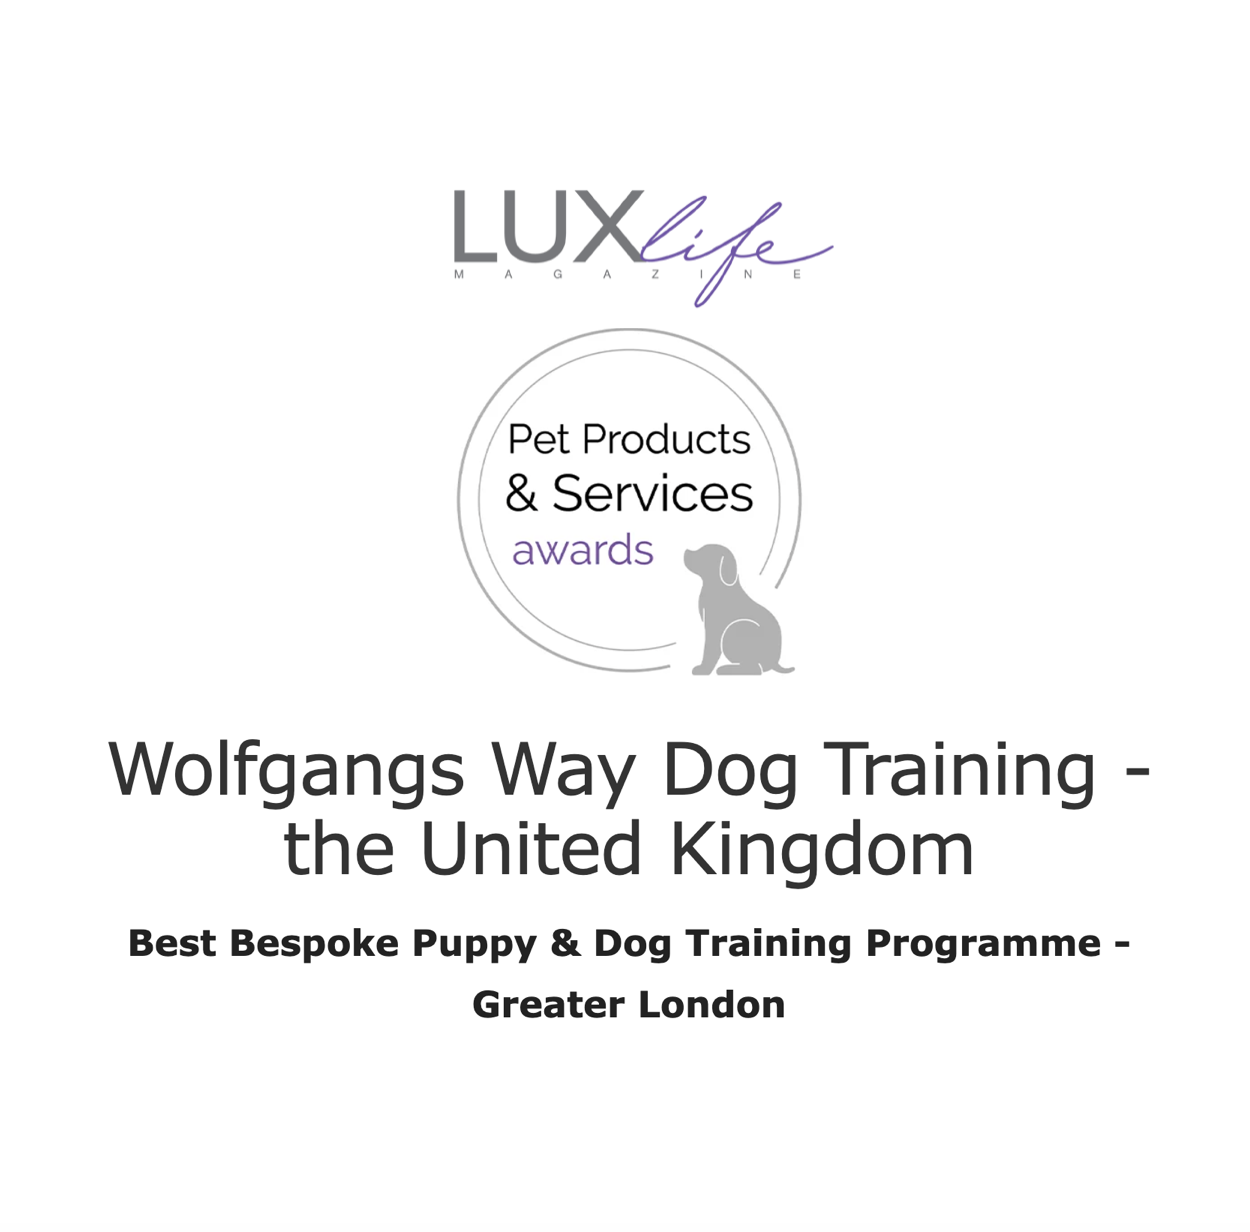 Lux Life Pet Products & Services Awards 2021.png